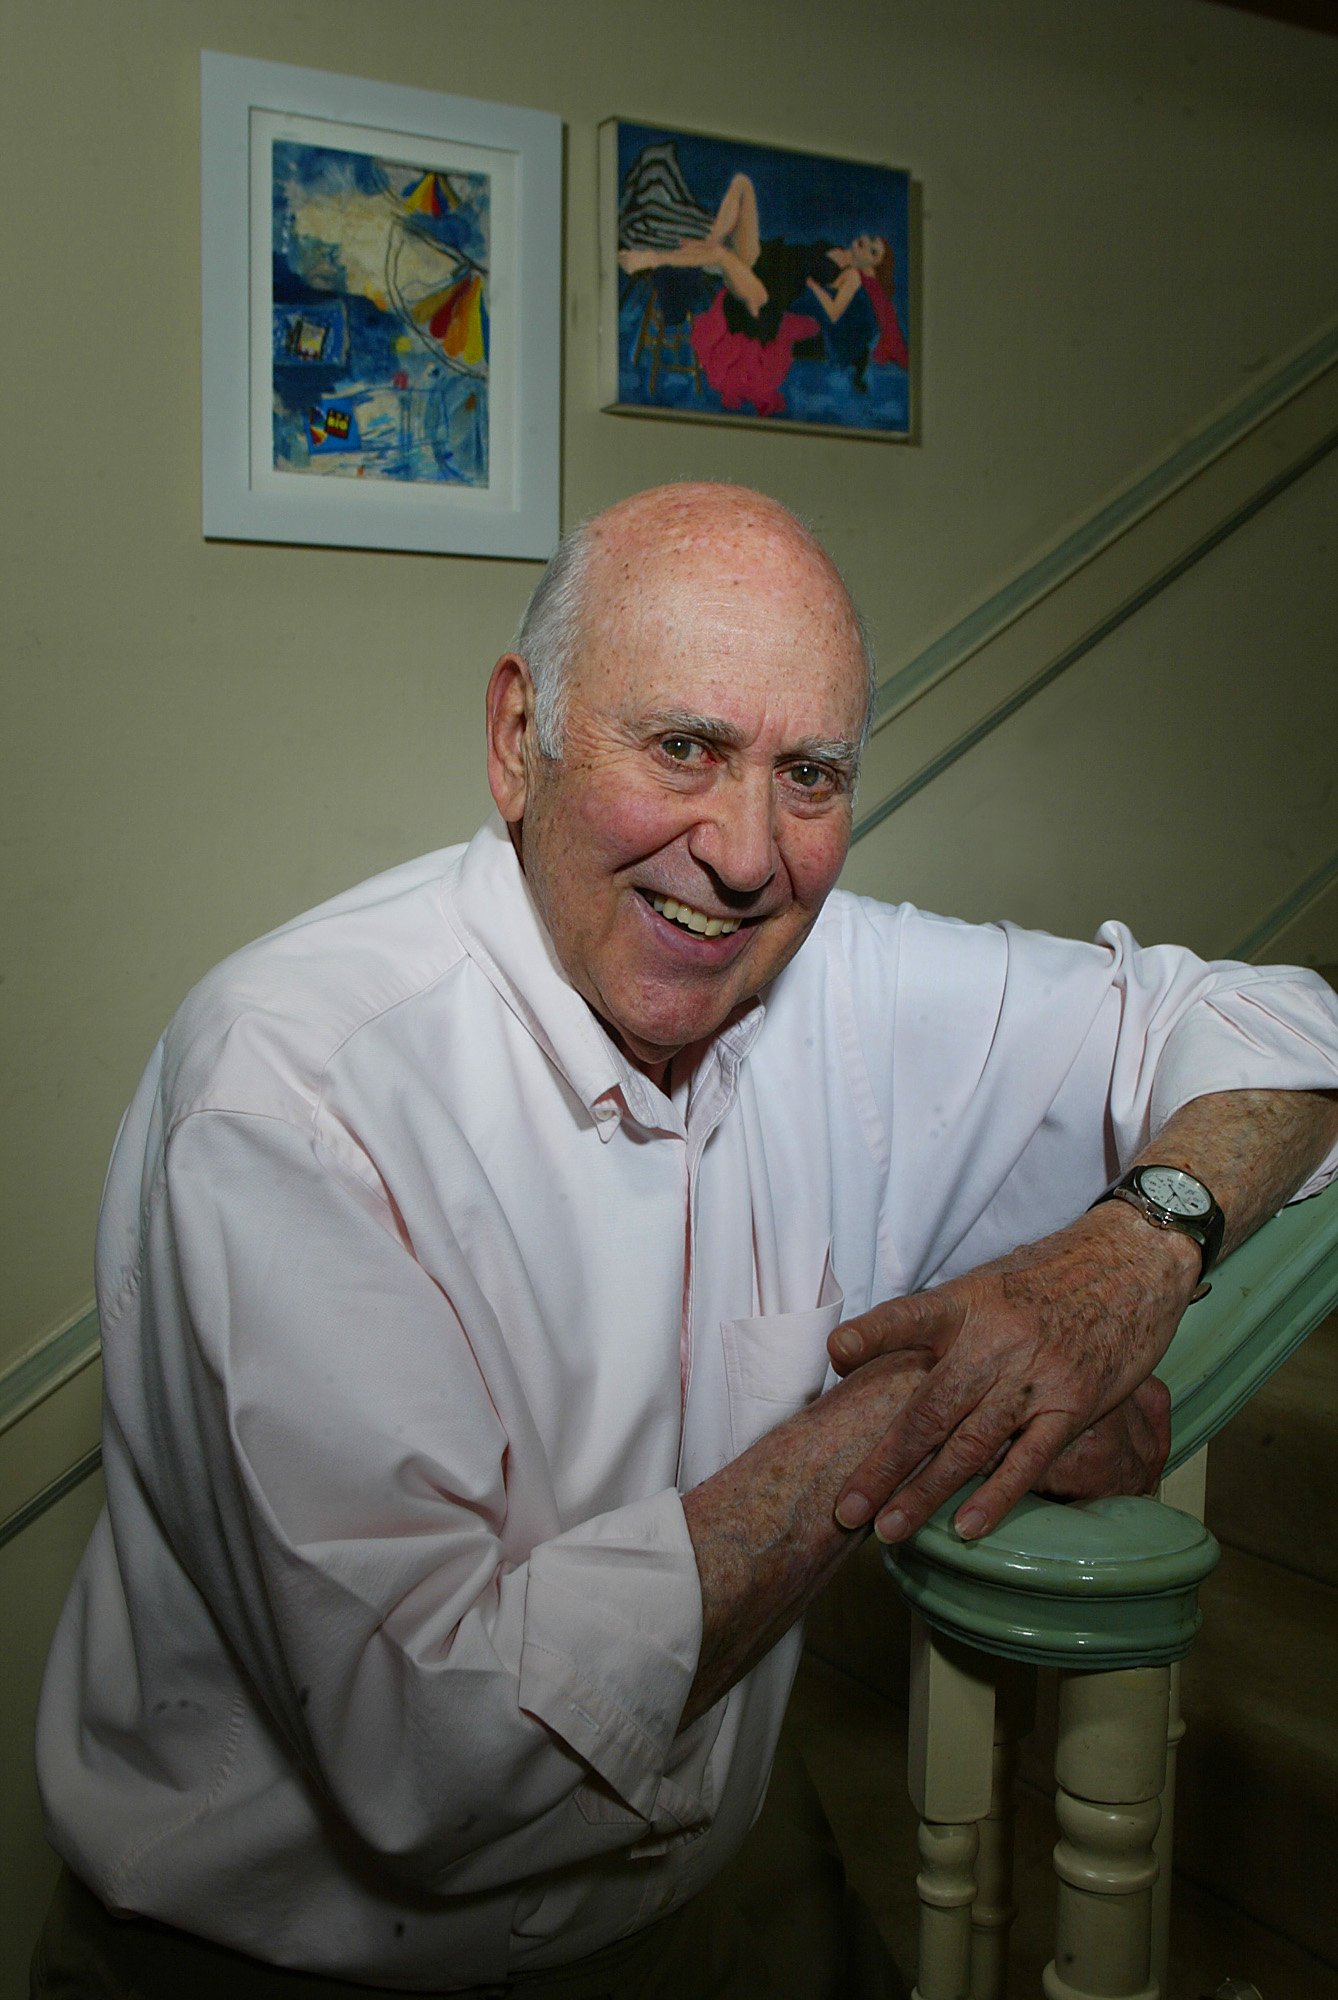 Carl Reiner at his Beverly Hills home, April 25, 2003. | Source: Getty Images.